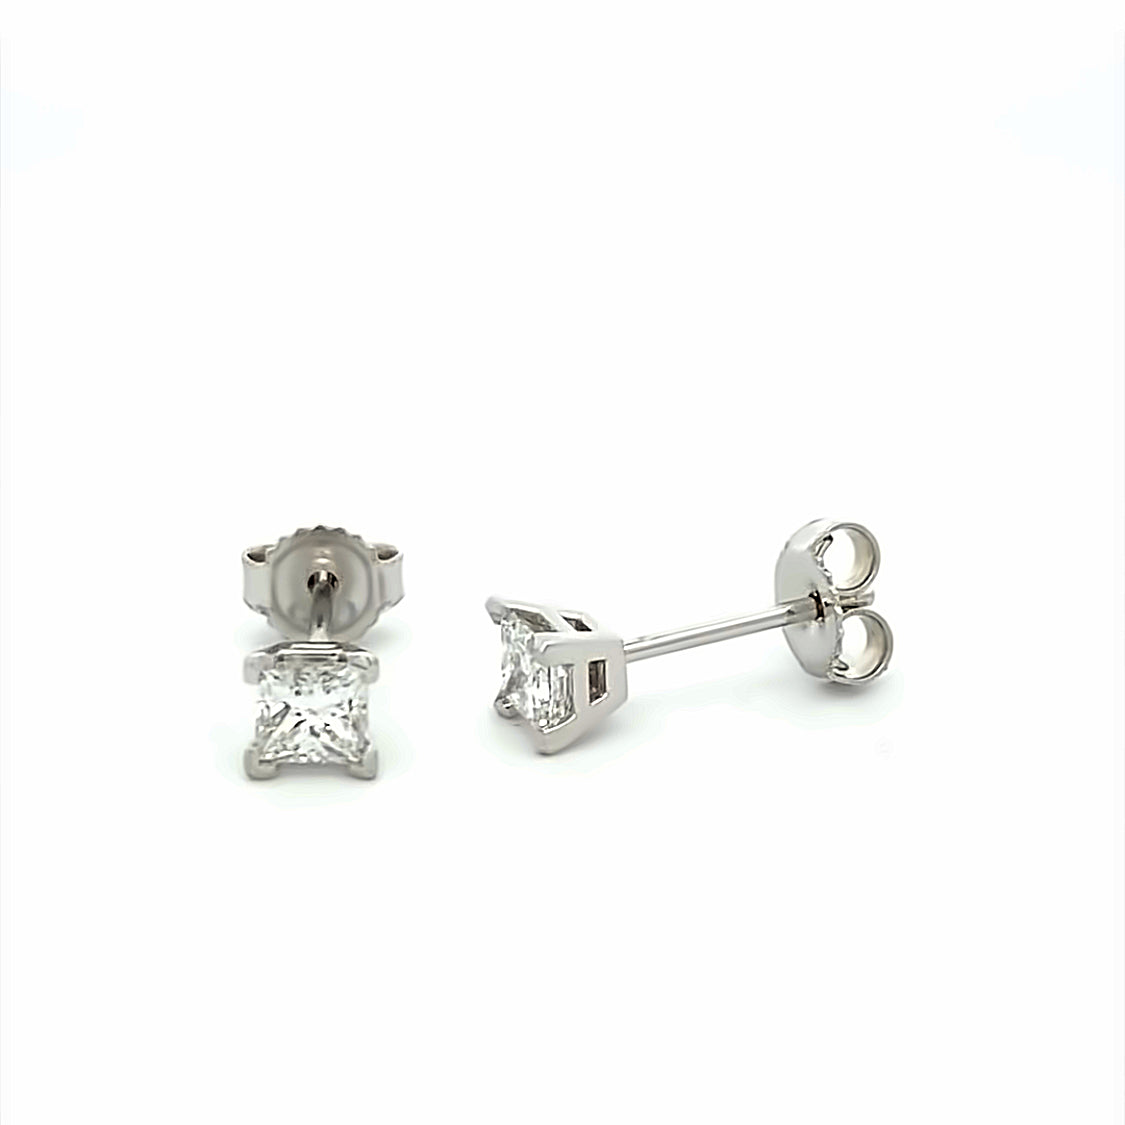 Beeghly & Co. 14 KT White Gold Diamond Stud Earrings  BCE-AS3PRW